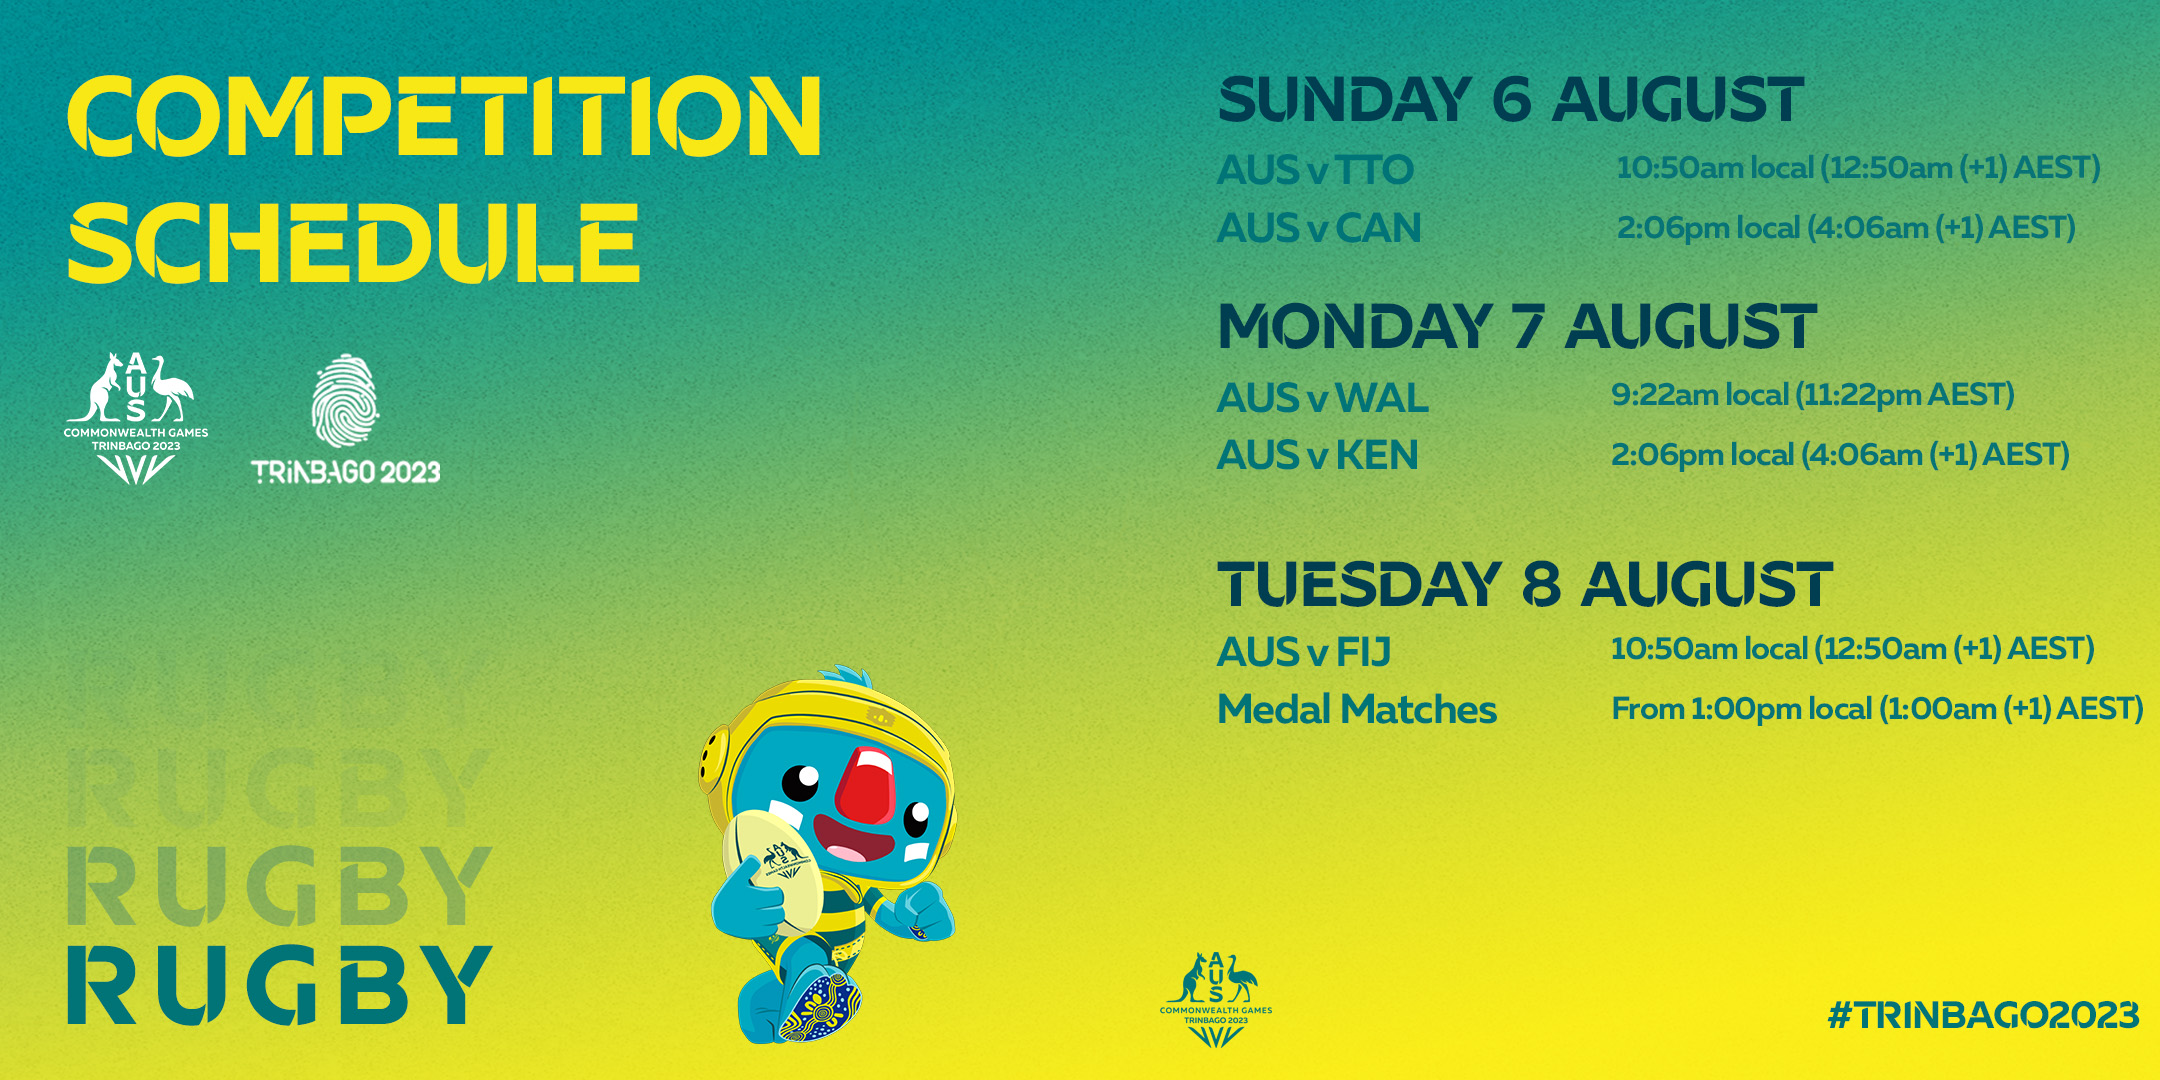 Livestream the Commonwealth Youth Games and follow the Australian Team! Commonwealth Games Australia